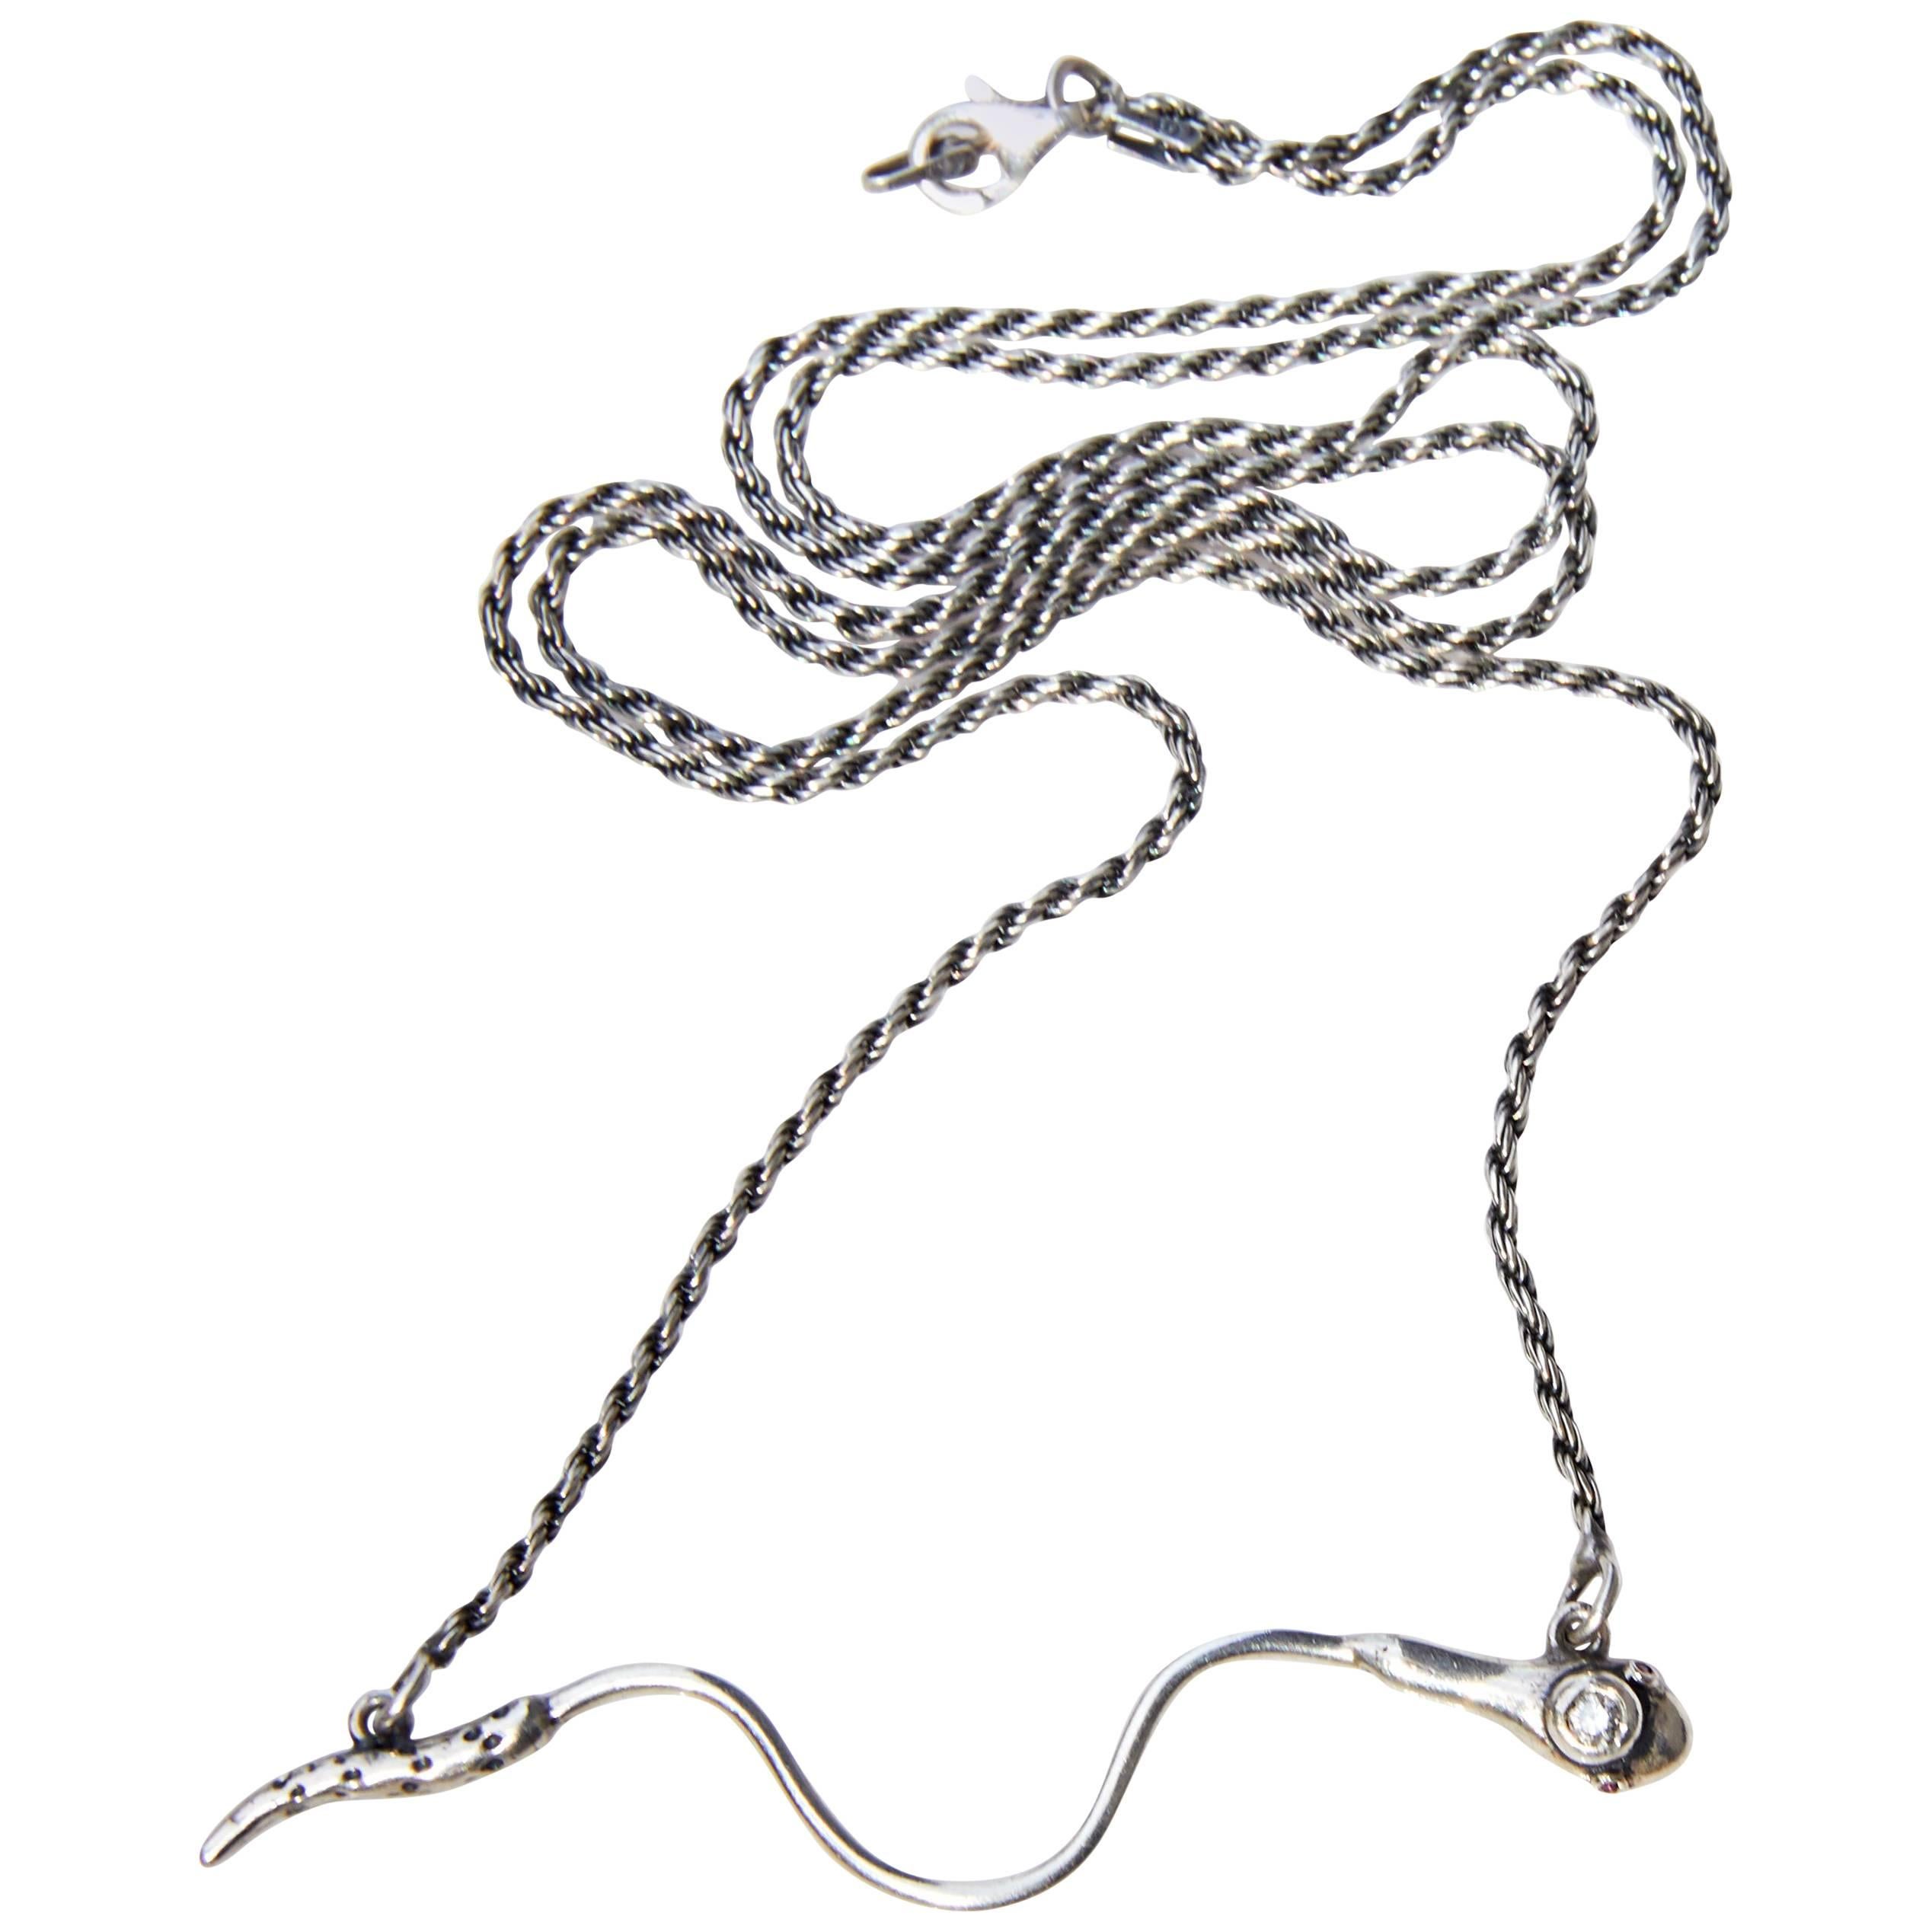 White Diamond Snake Necklace Sterling Silver Ruby Eyes Chain J Dauphin For Sale